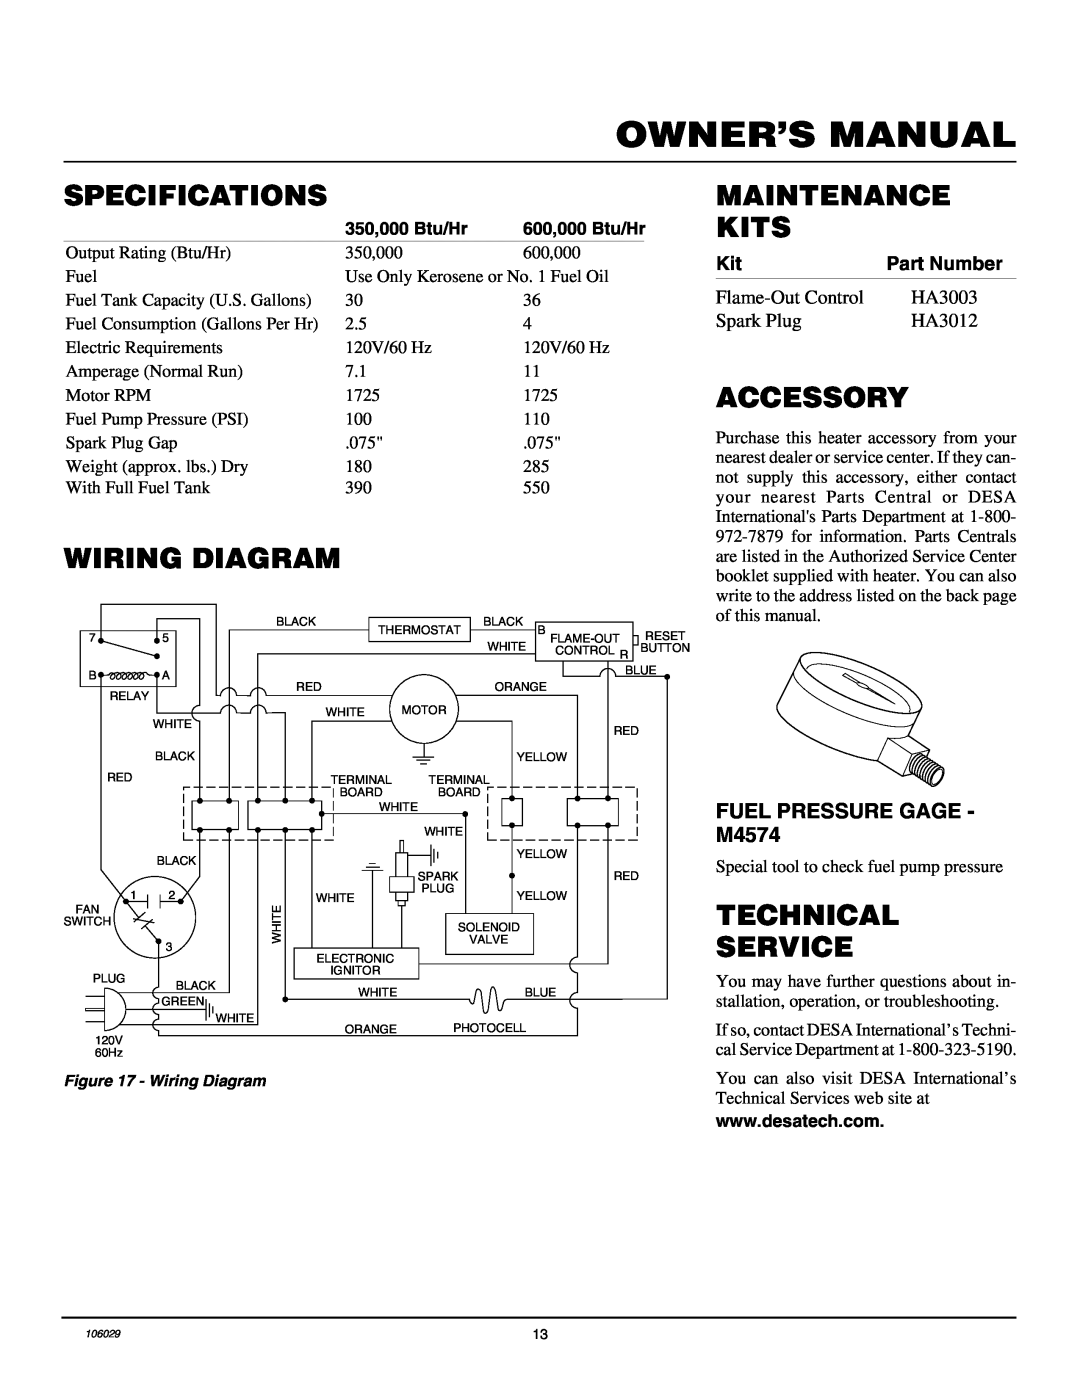 Desa SB350D Specifications, Wiring Diagram, Maintenance Kits, Accessory, Technical Service, FUEL PRESSURE GAGE - M4574 